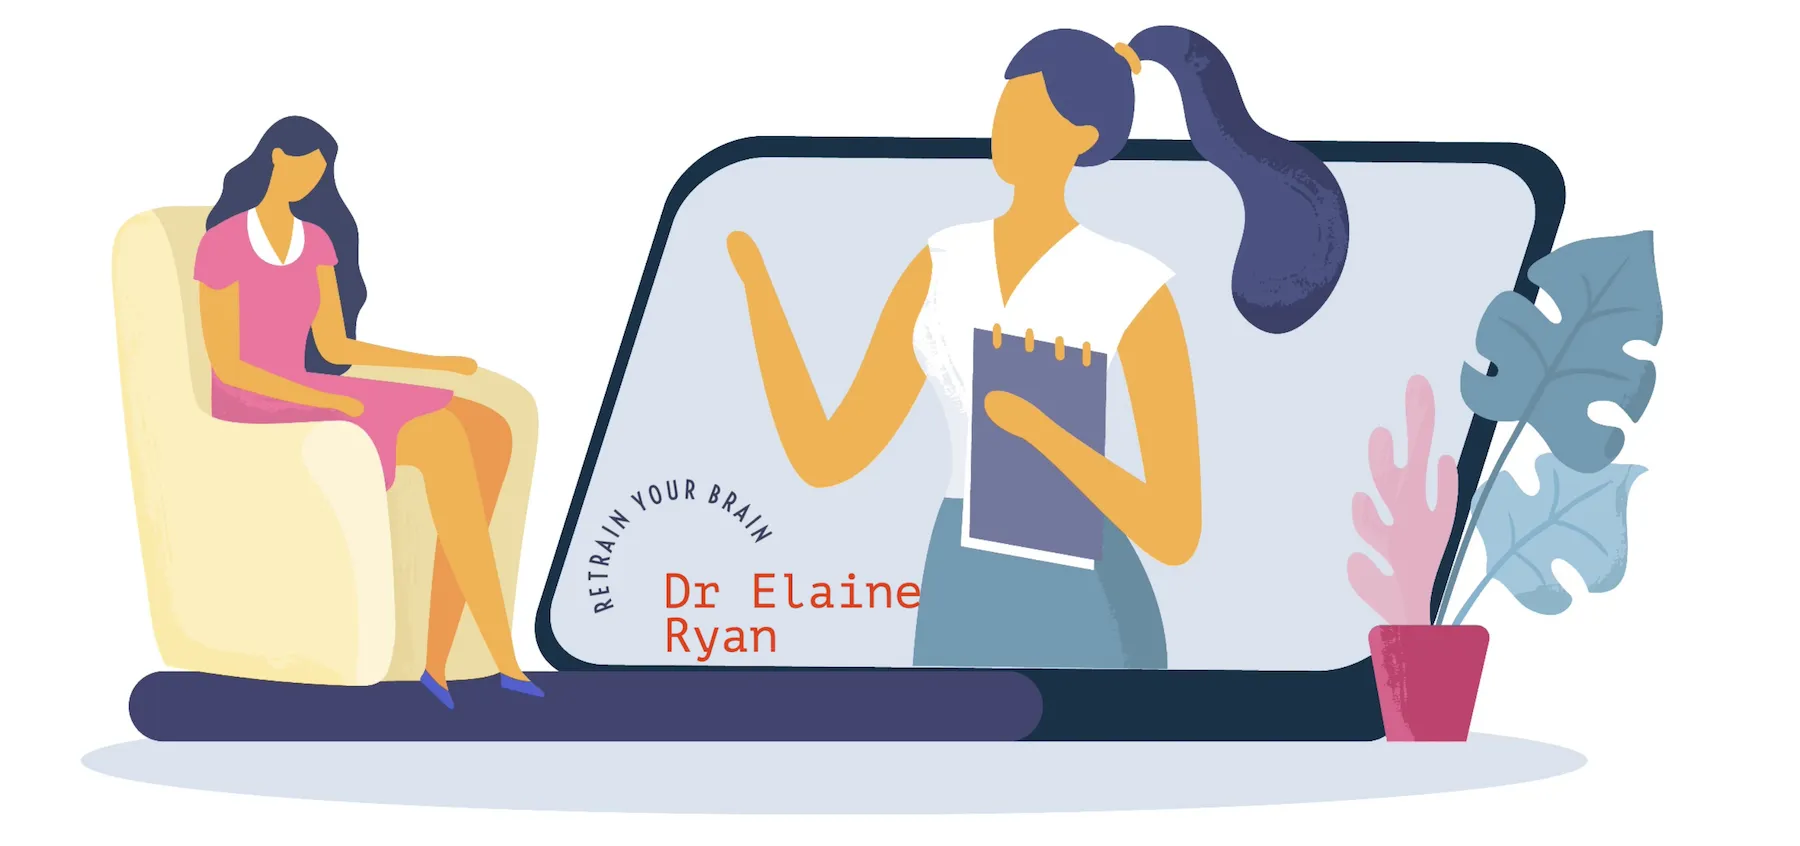 image showing online therapy session with Dr Elaine Ryan branding on screen